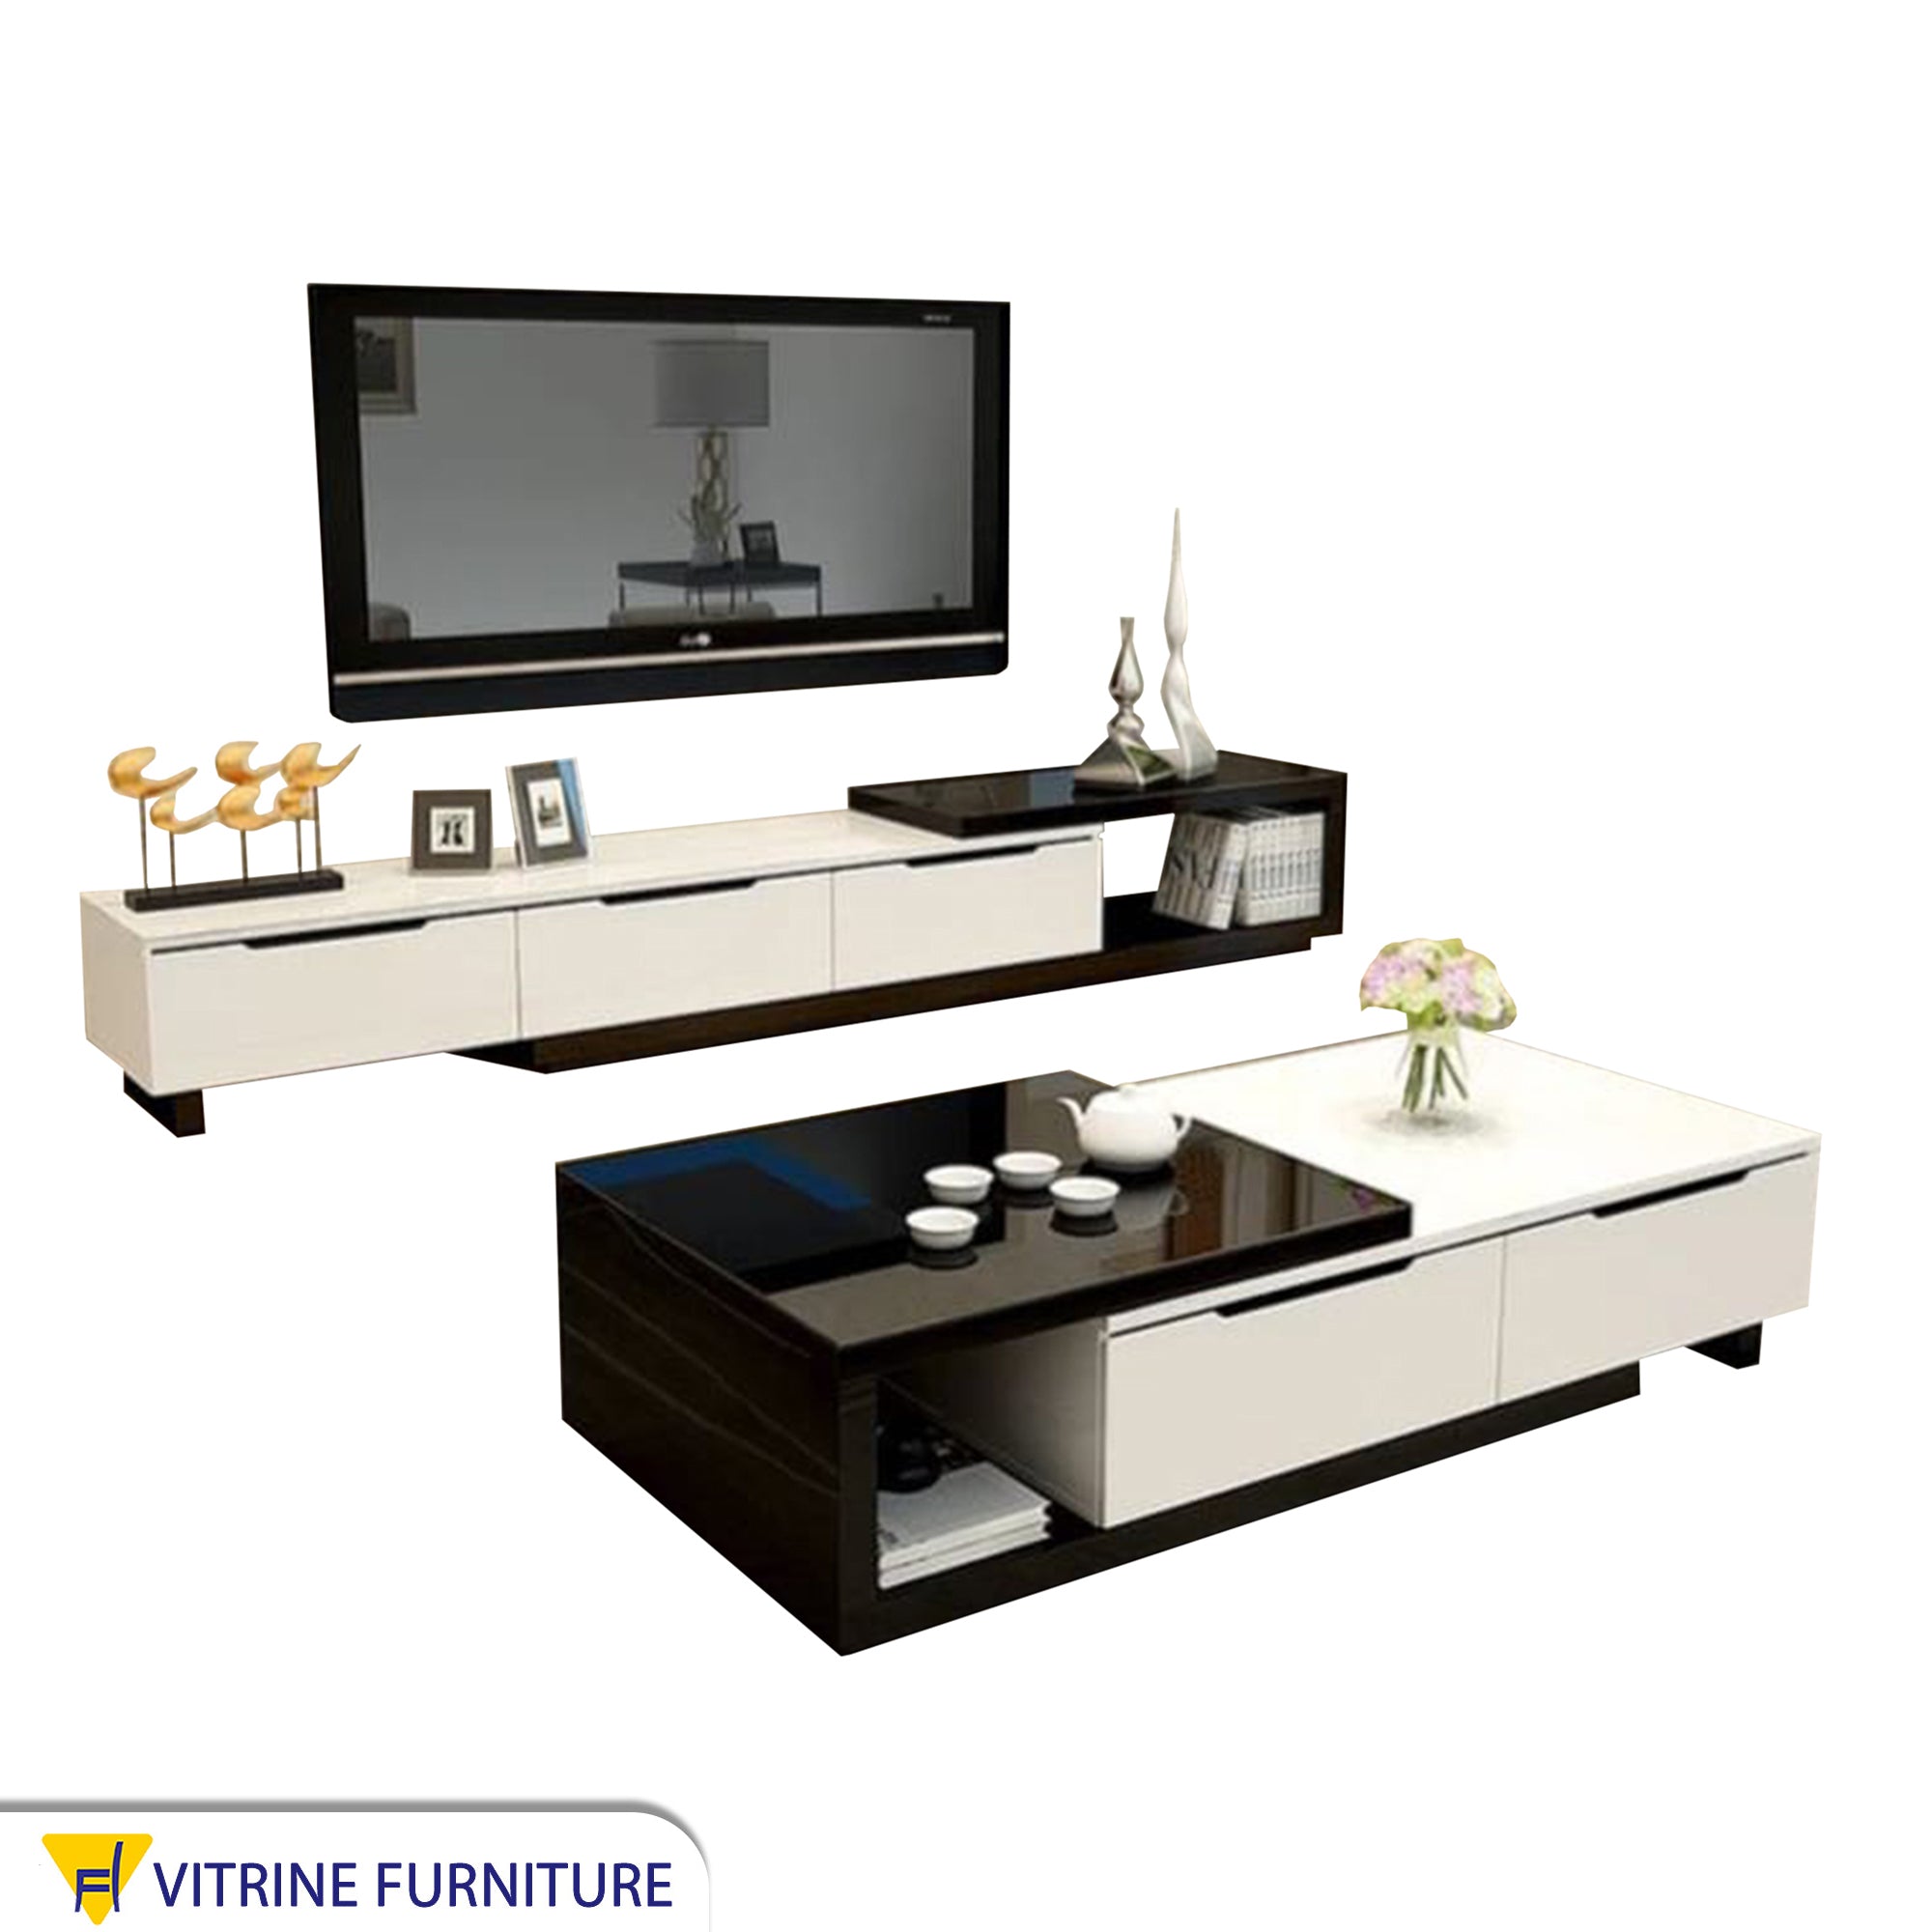 A black and white TV table and middle table